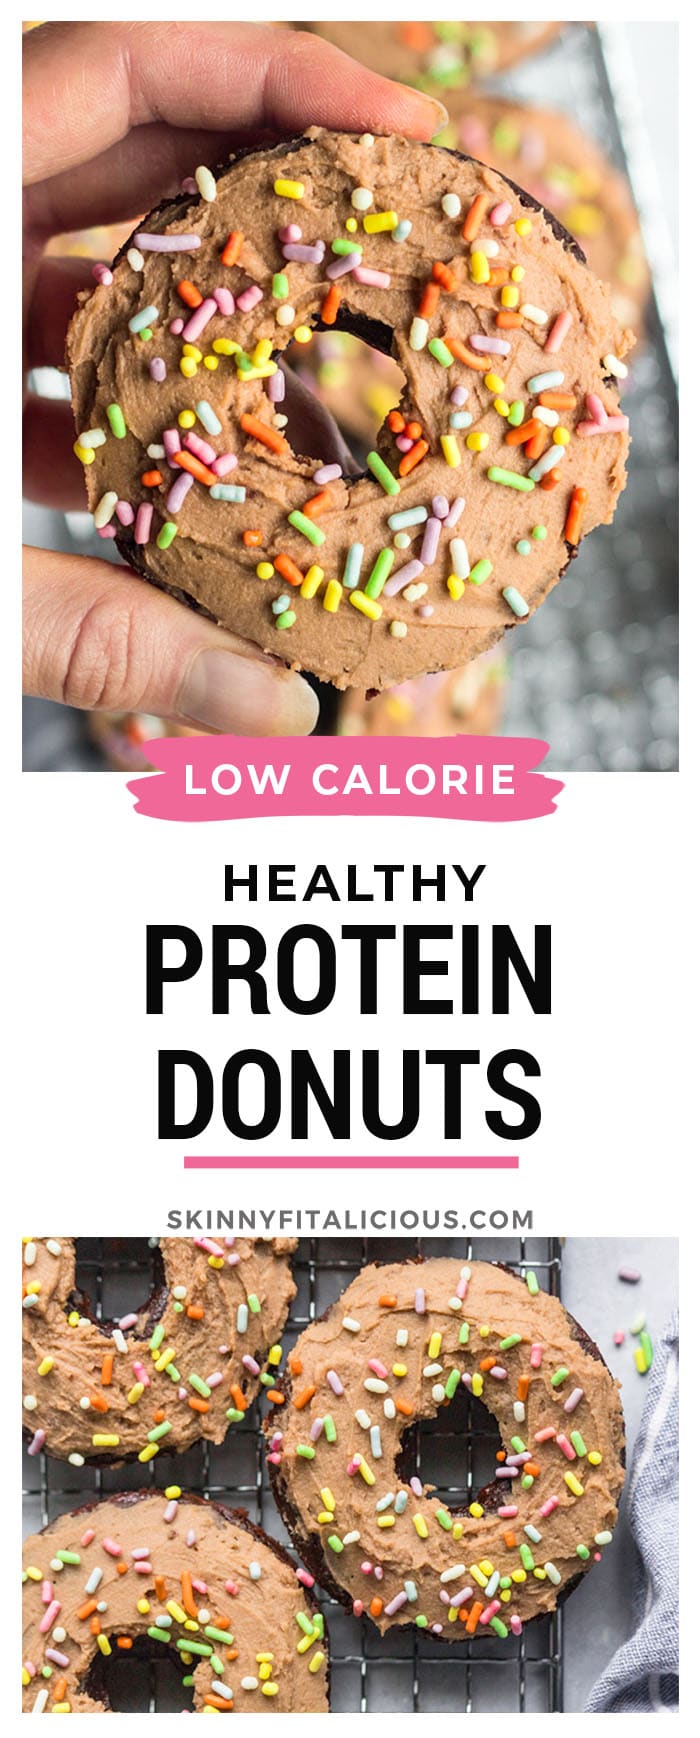 Healthy Chocolate Protein Donuts made low calorie and gluten free with a lighter cream cheese protein frosting. A delicious, healthy protein donut recipe that's versatile and easy to make. 